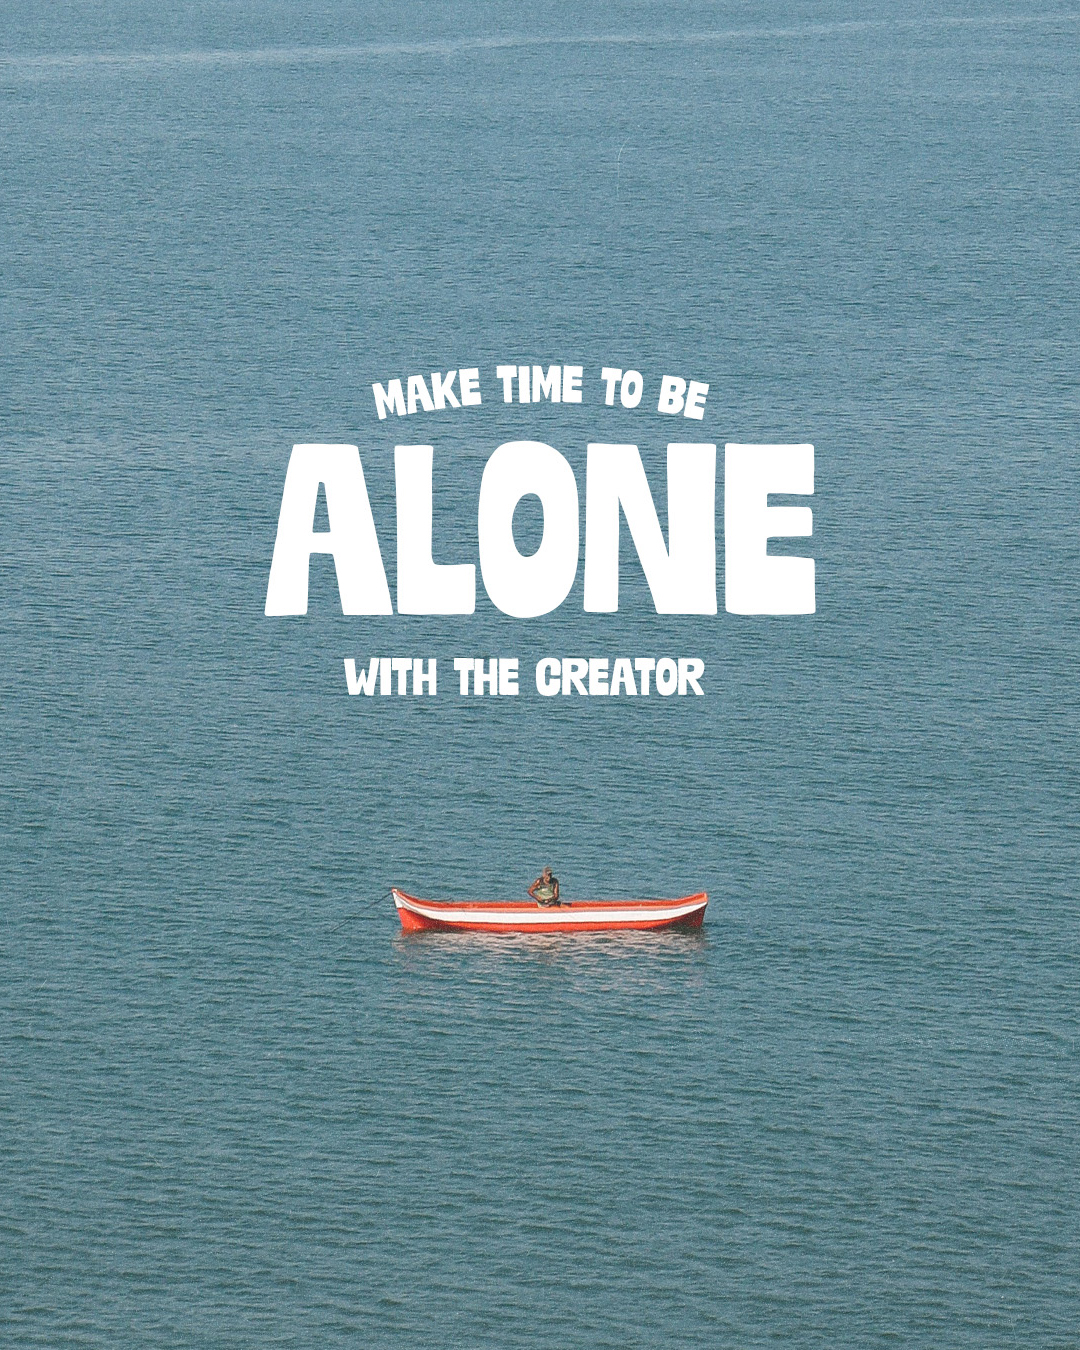 Make time to be alone with the Creator